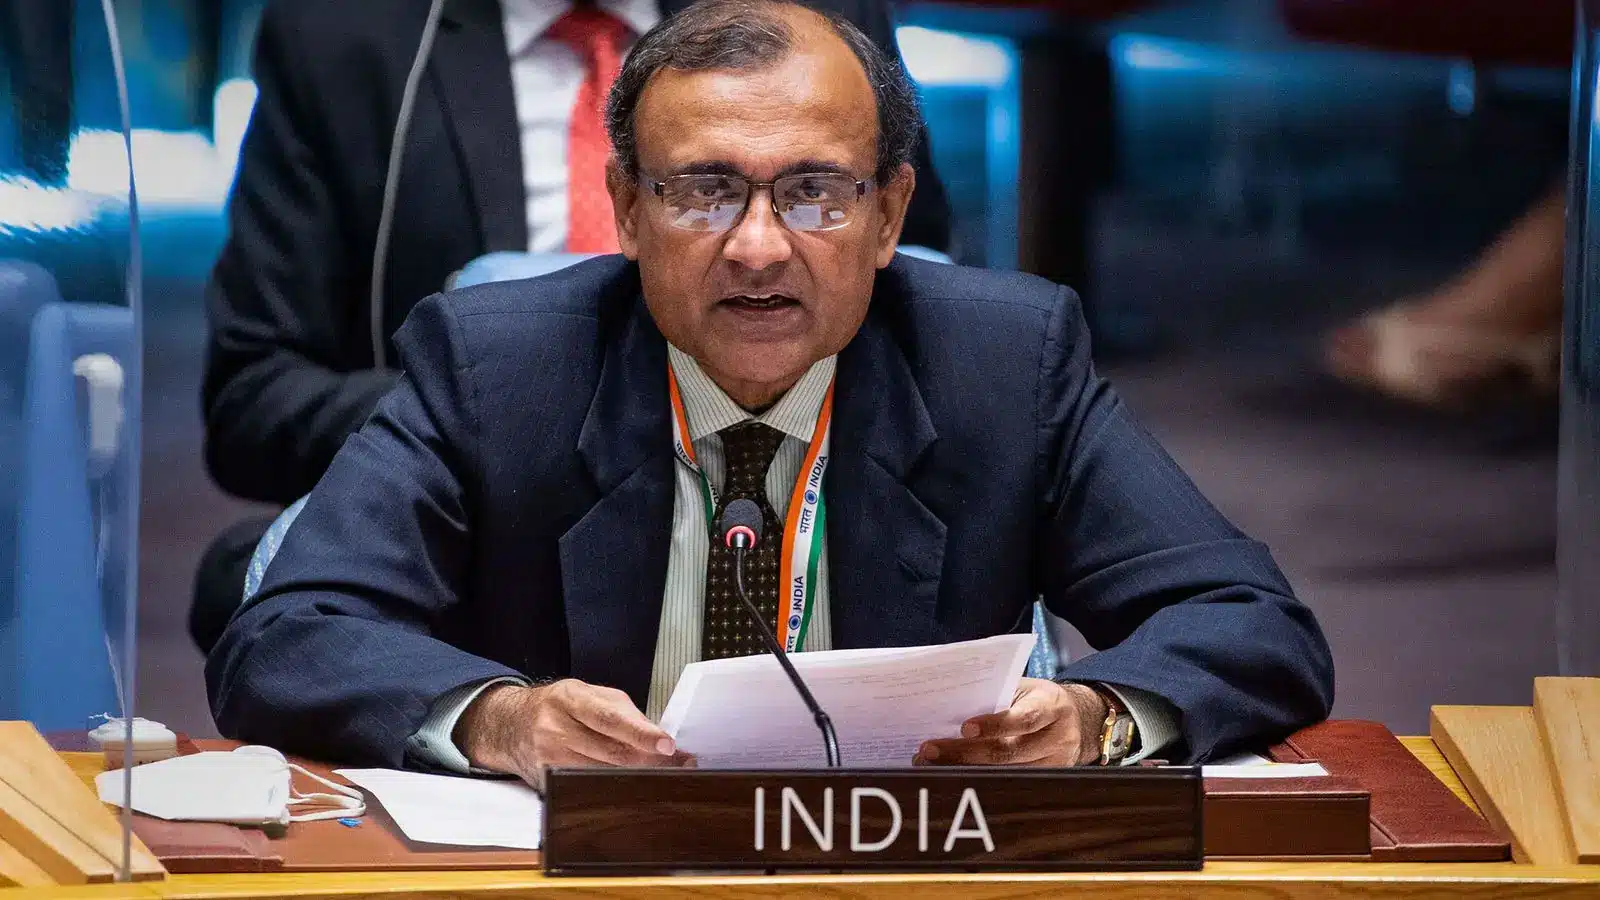 India On First Day Of Its UNSC Presidency: Don't Tell Us What To Do On Democracy - Asiana Times